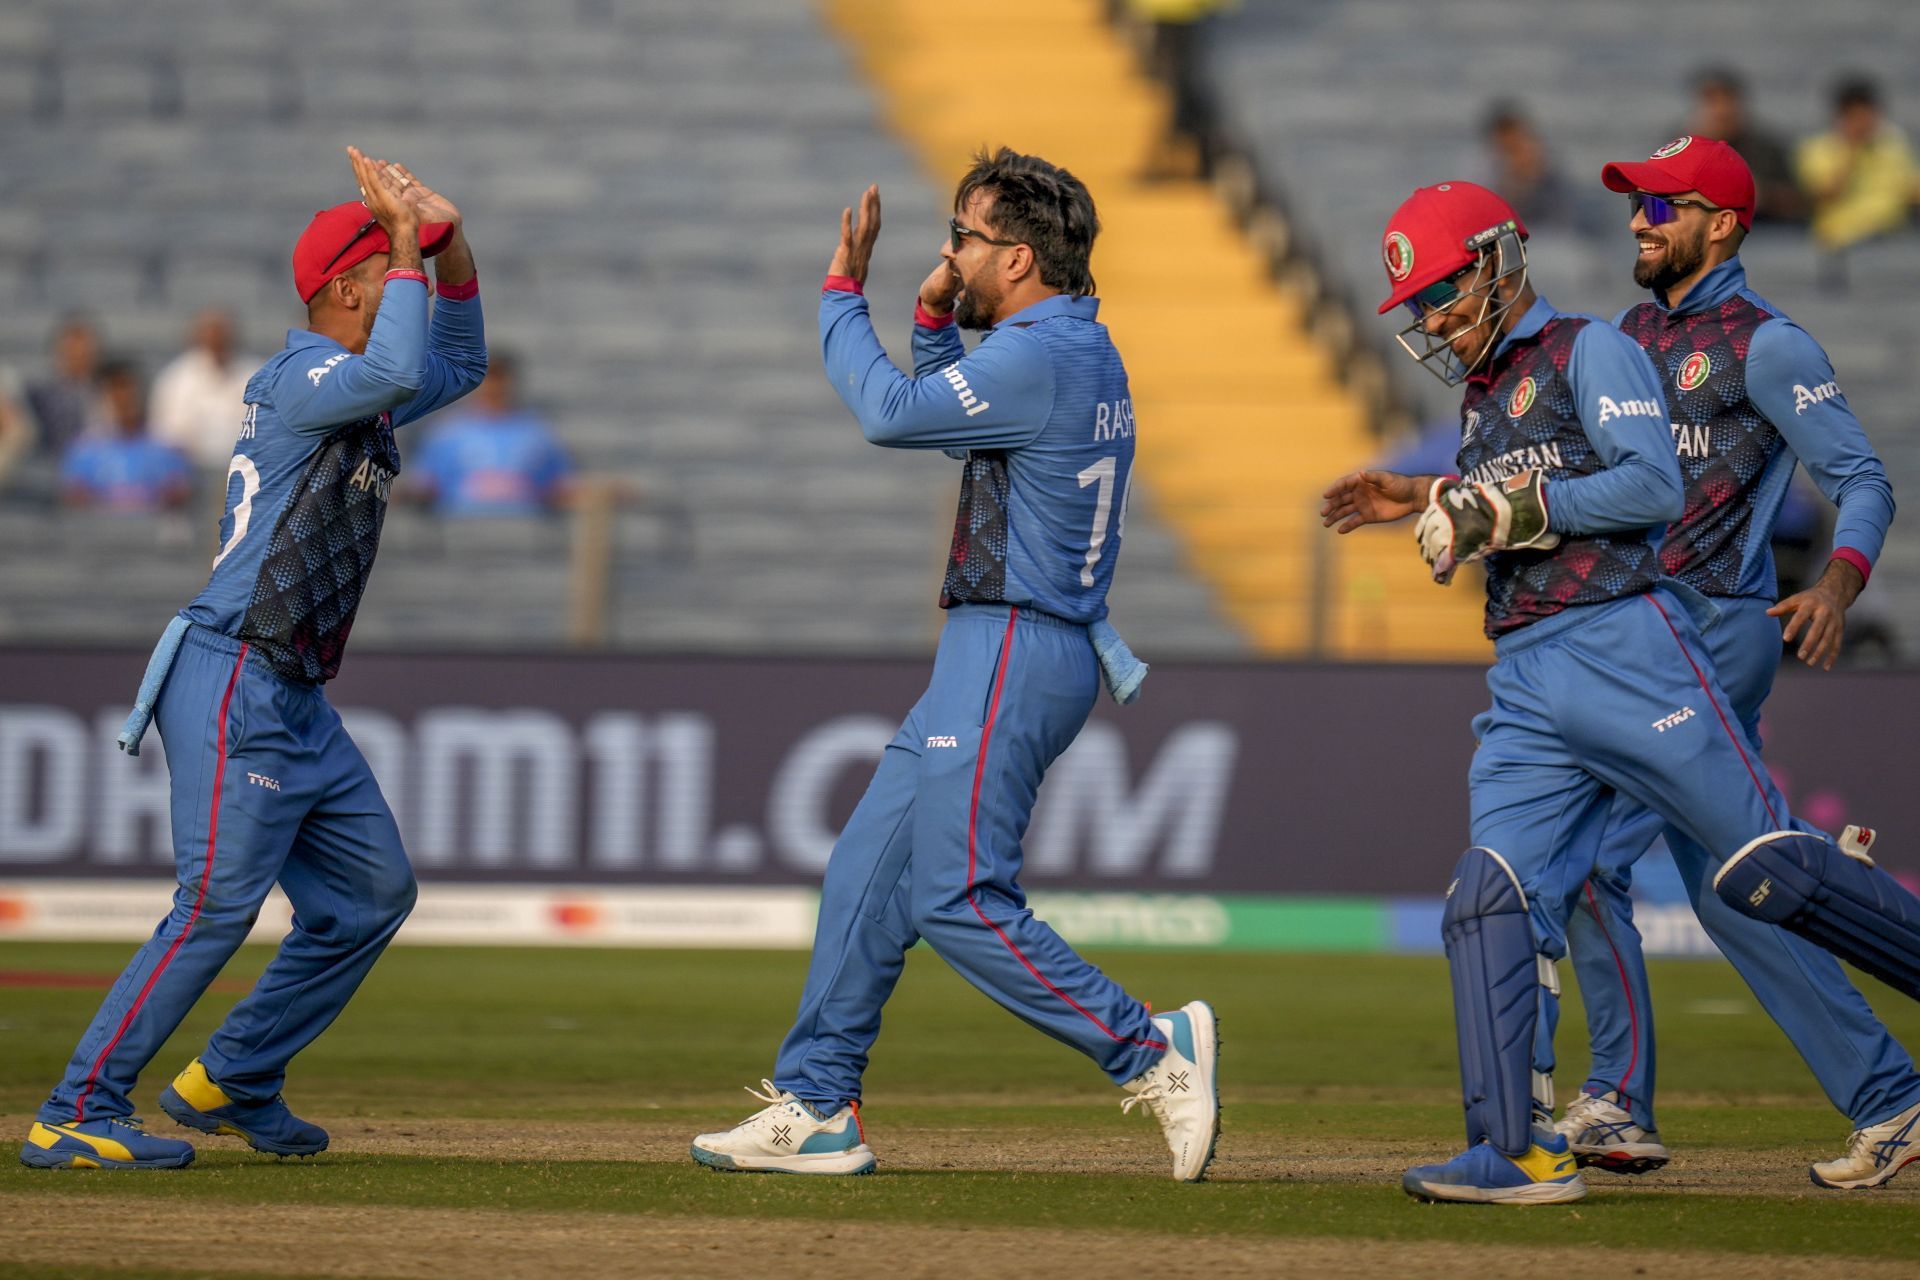 Afghanistan has brought joy to this World Cup